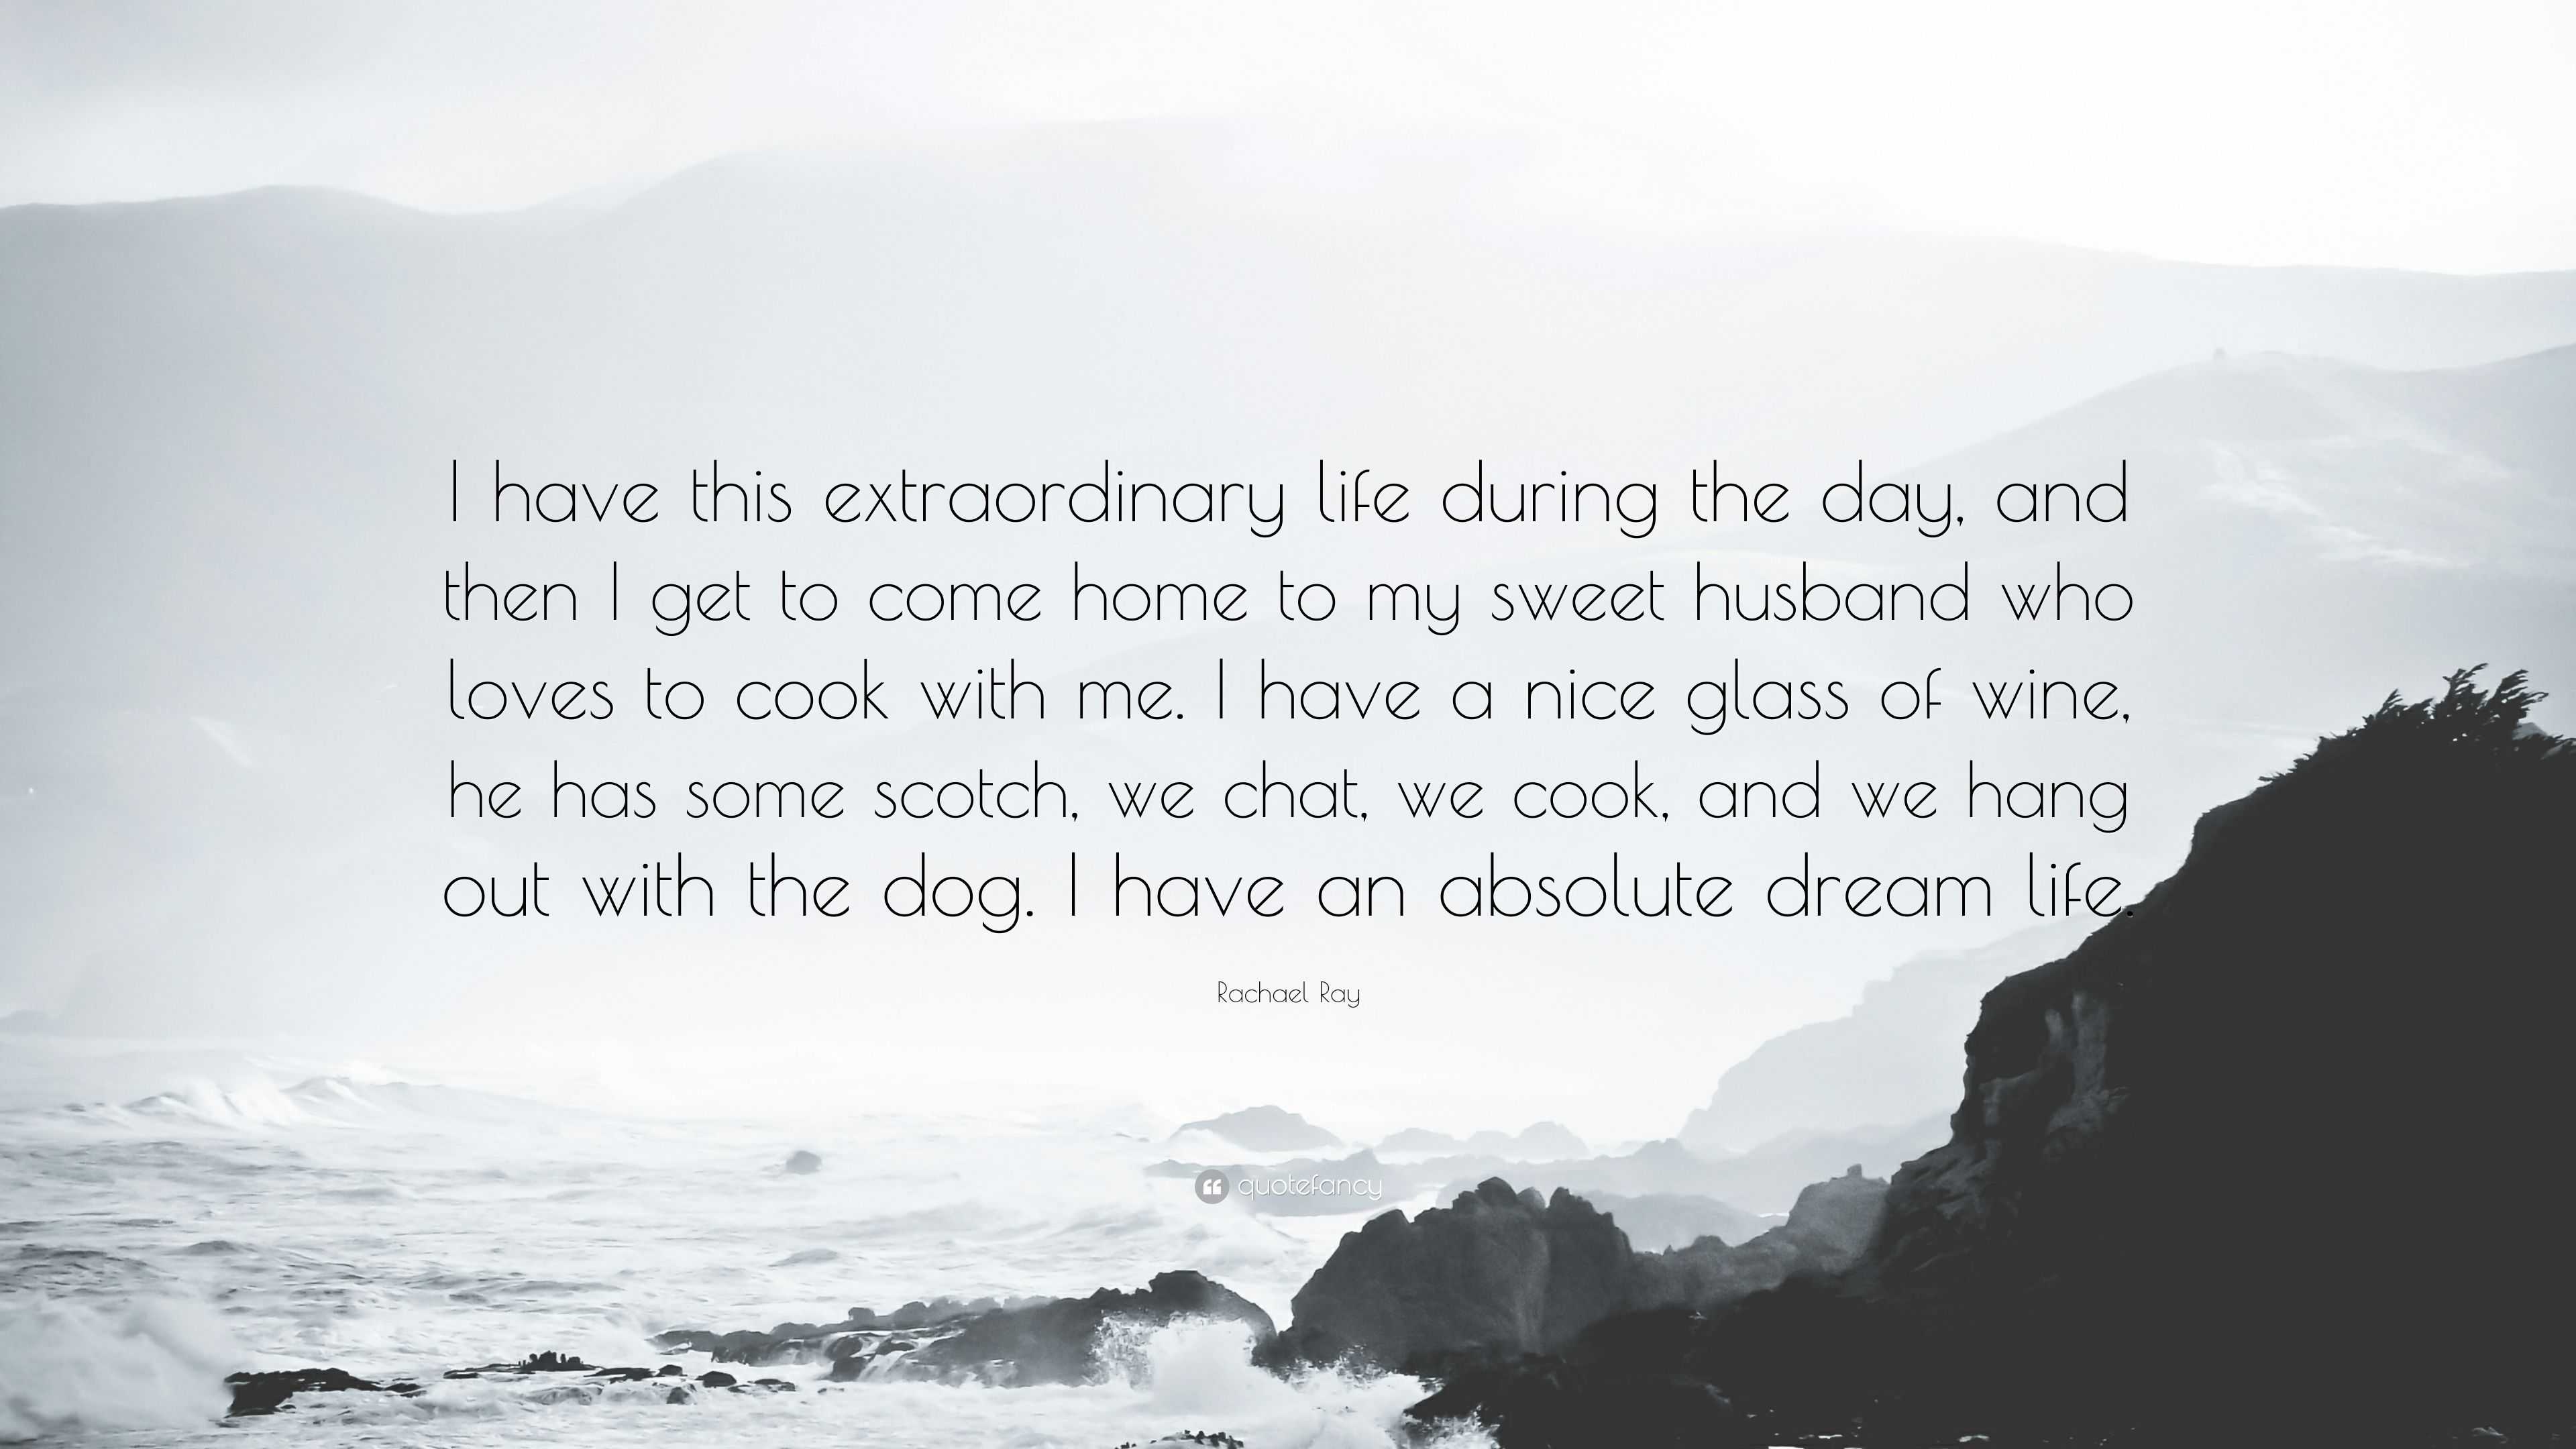 Rachael Ray Quote: “I have this extraordinary life during the day